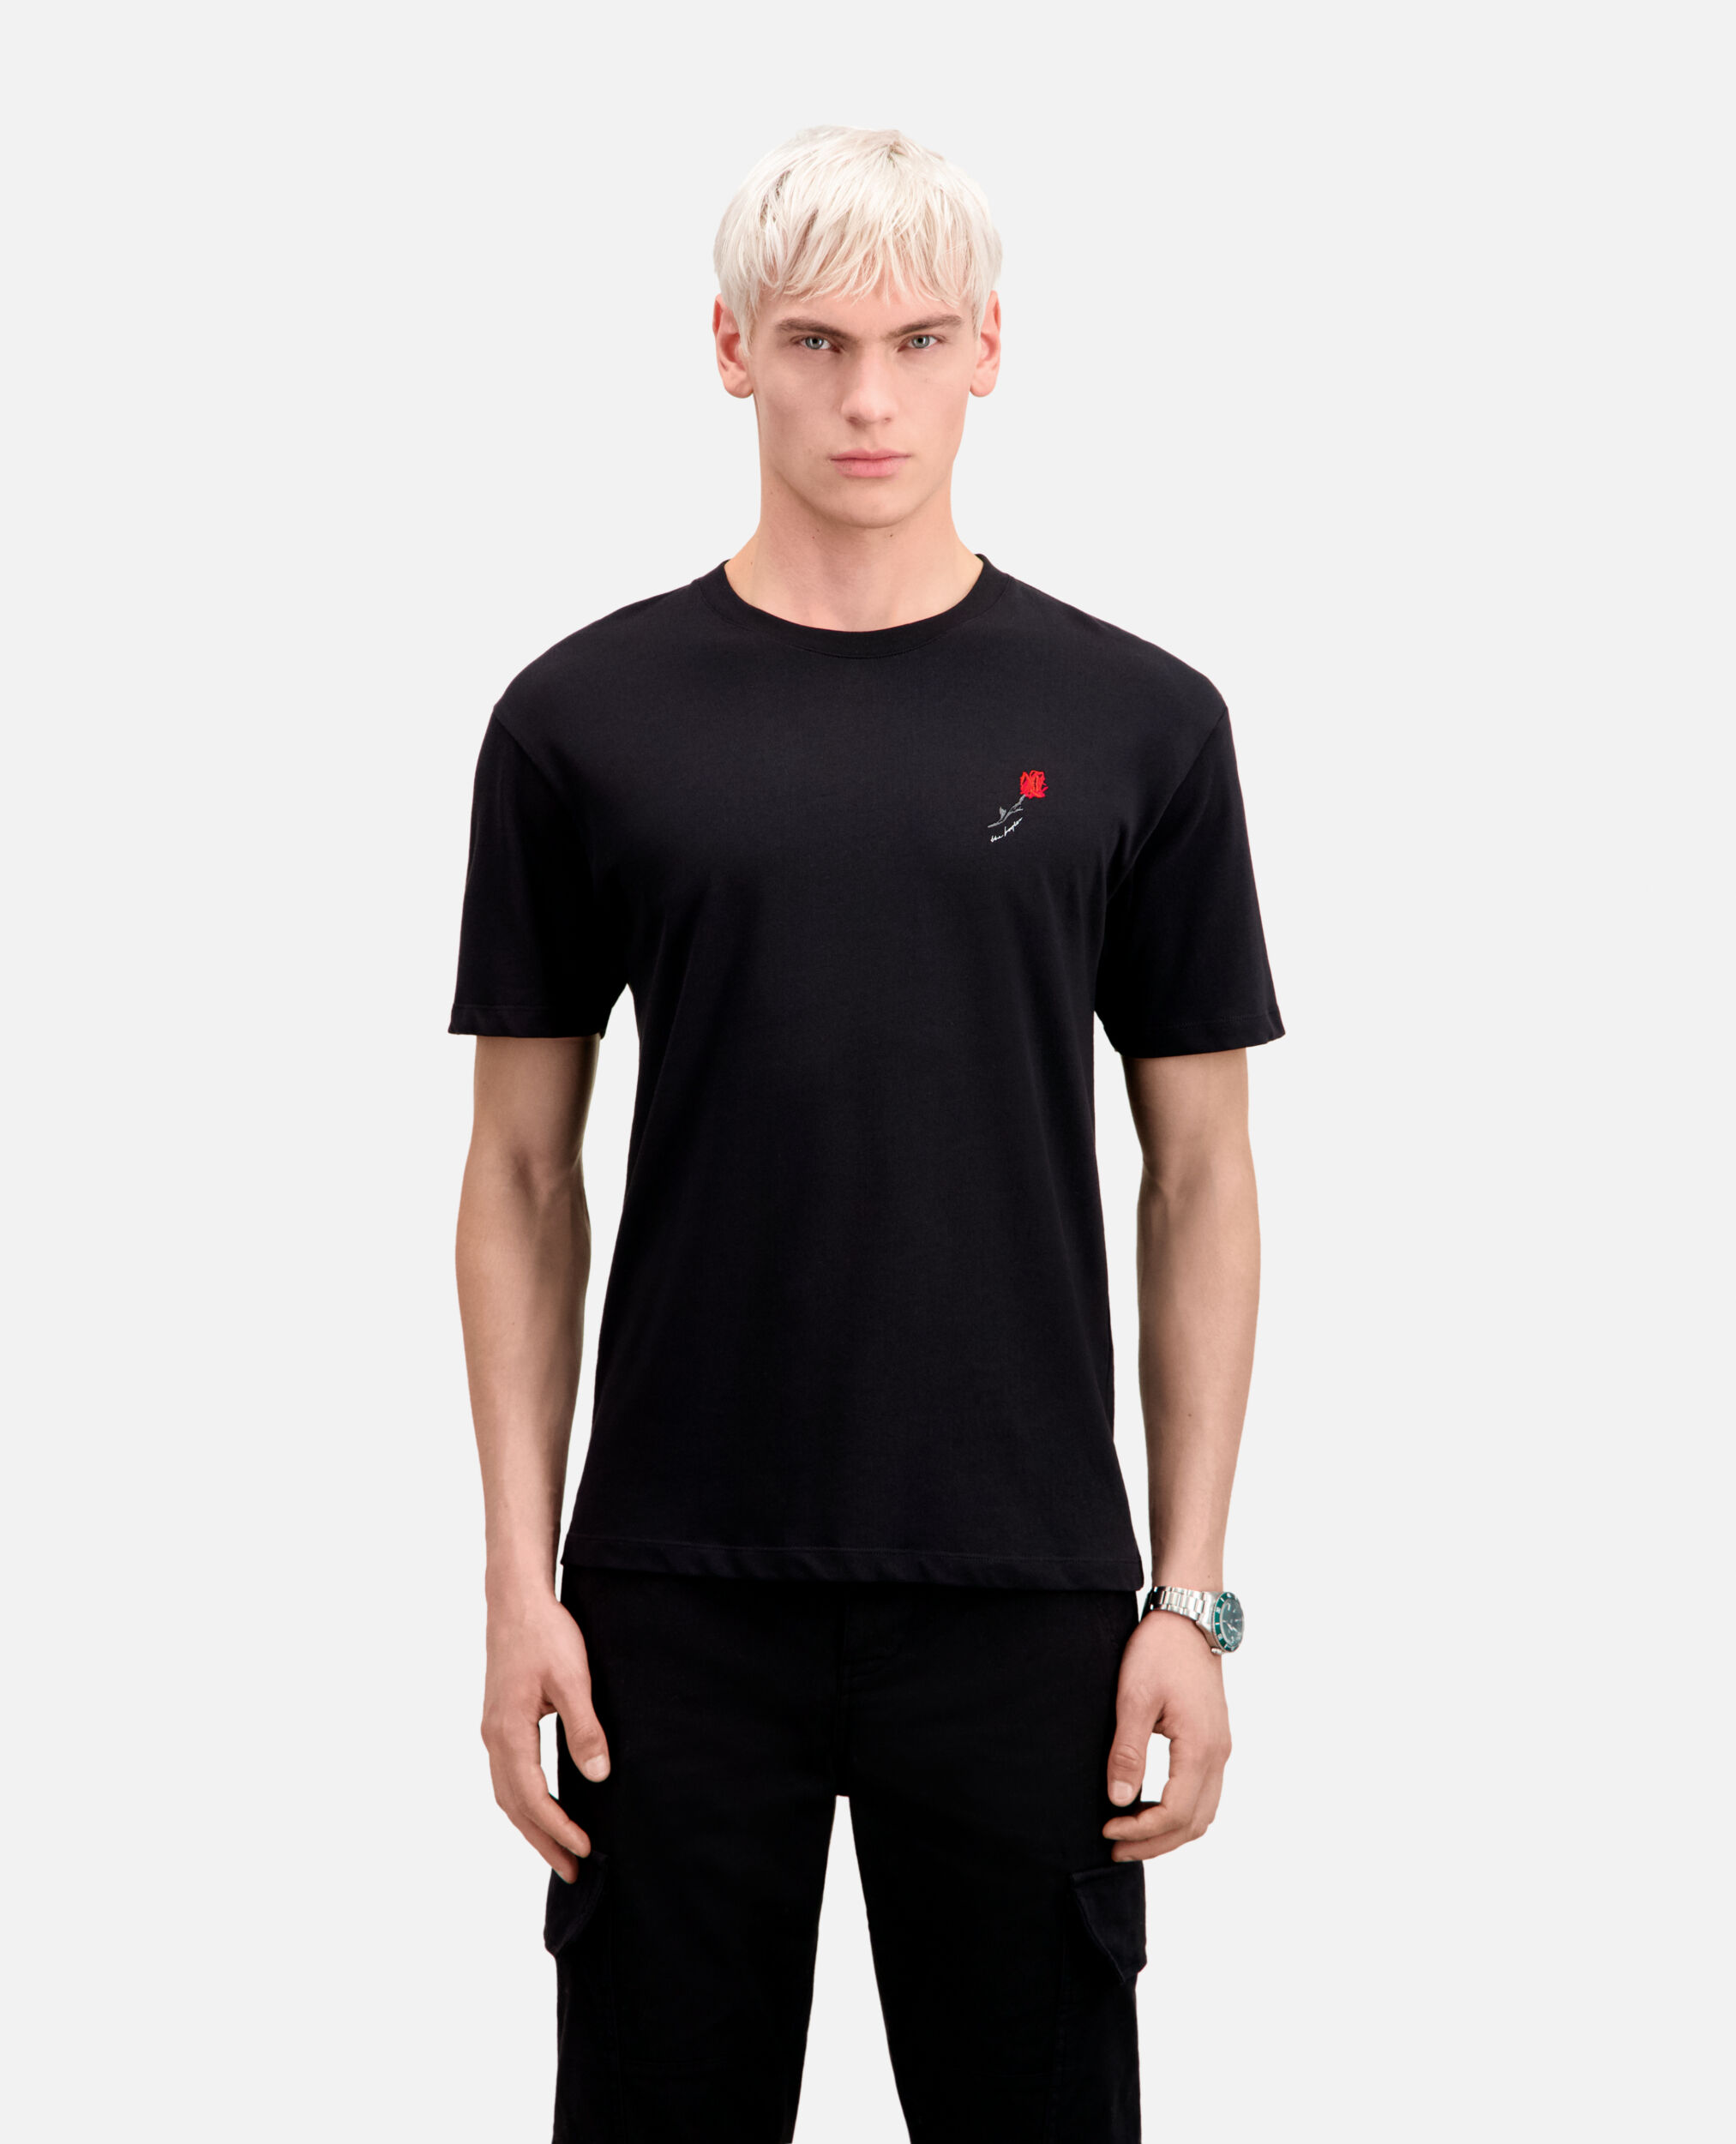 Men's black t-shirt with flower embroidery, BLACK, hi-res image number null